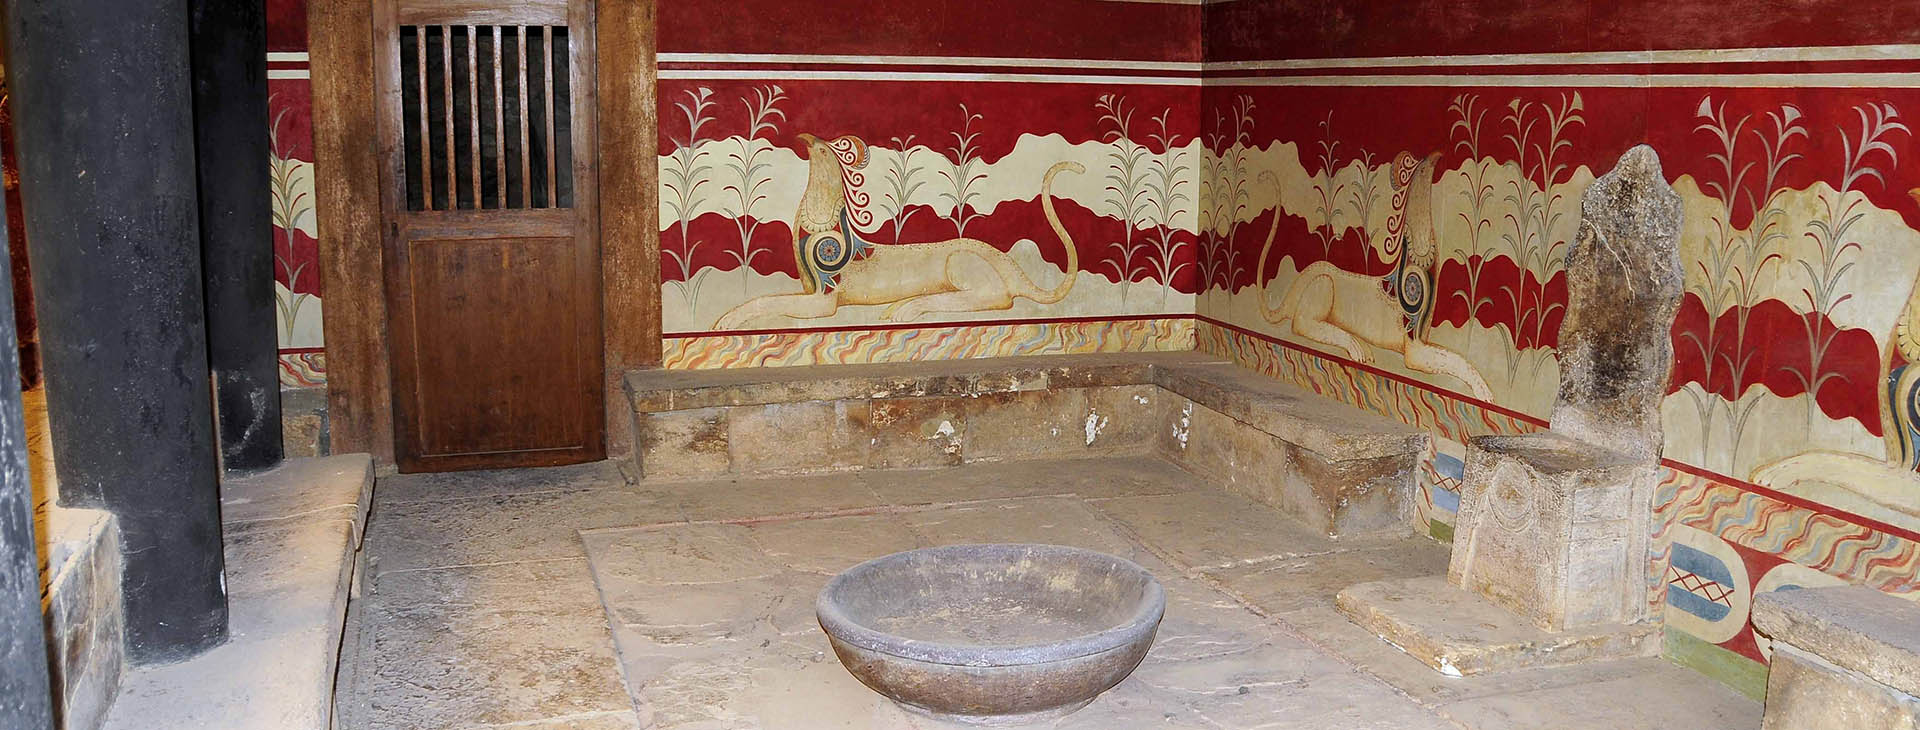 The throne room at the Minoan palace of Knossos, Heraklion